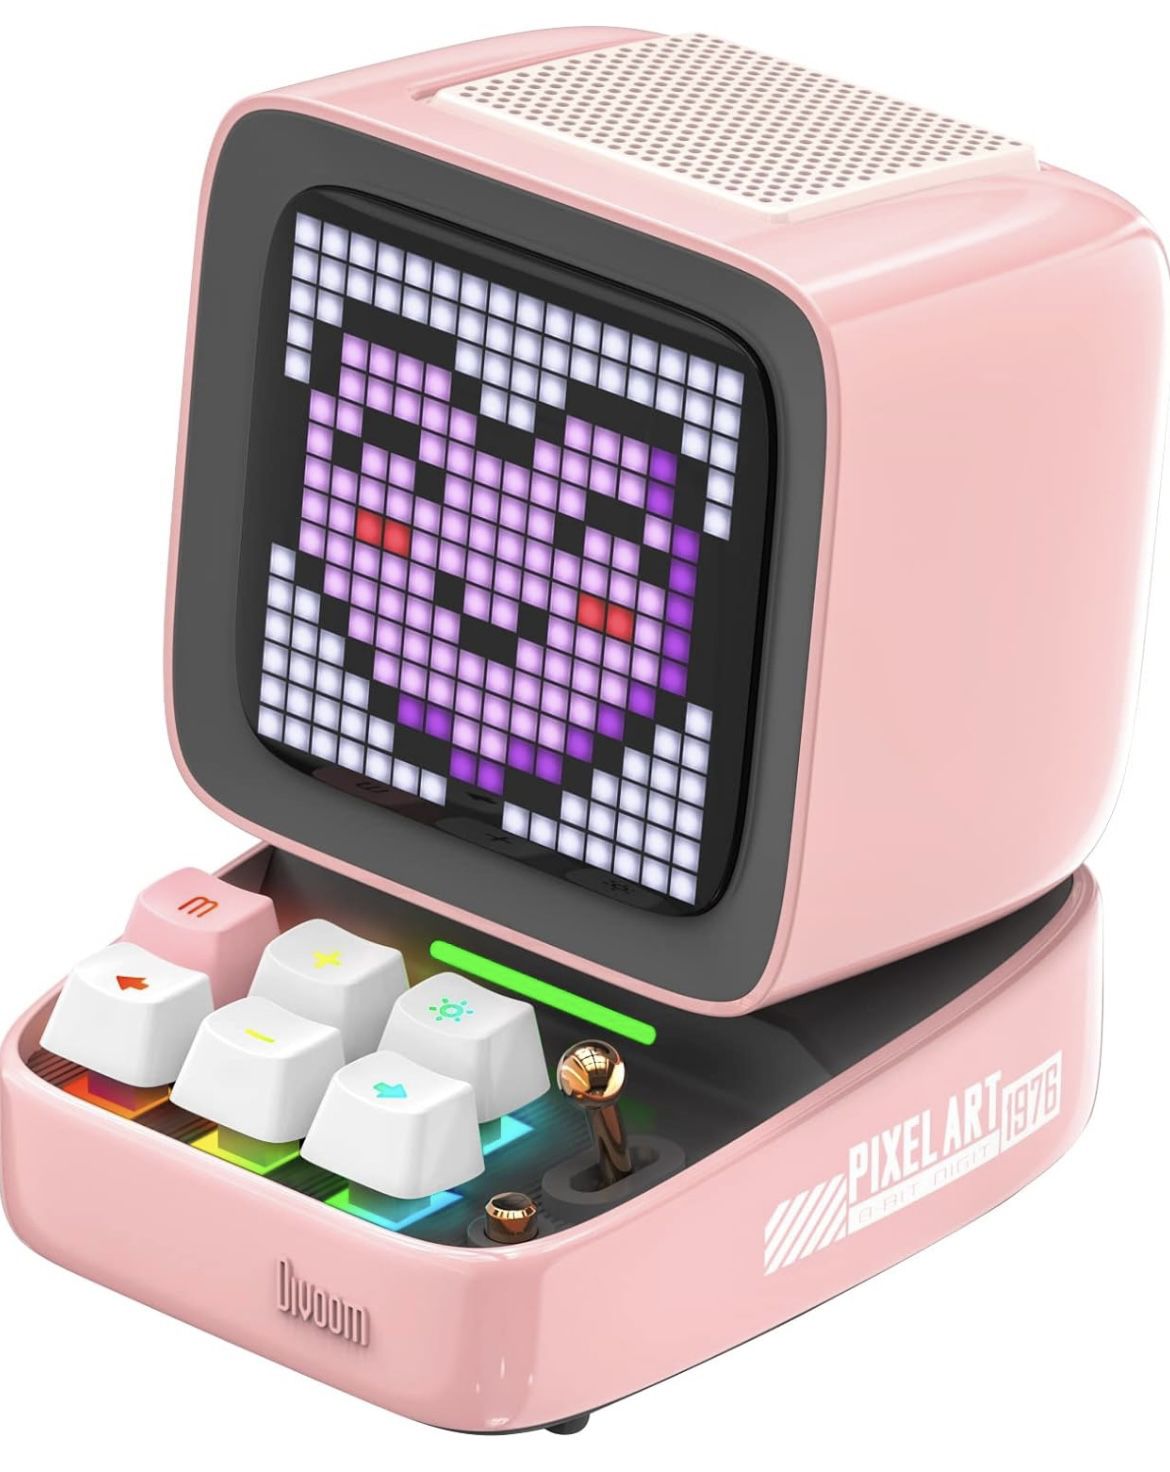 New In Box Divoom Ditoo Retro Pixel Art Game Bluetooth Speaker with 16X16 LED App Controlled Front Screen (Pink)